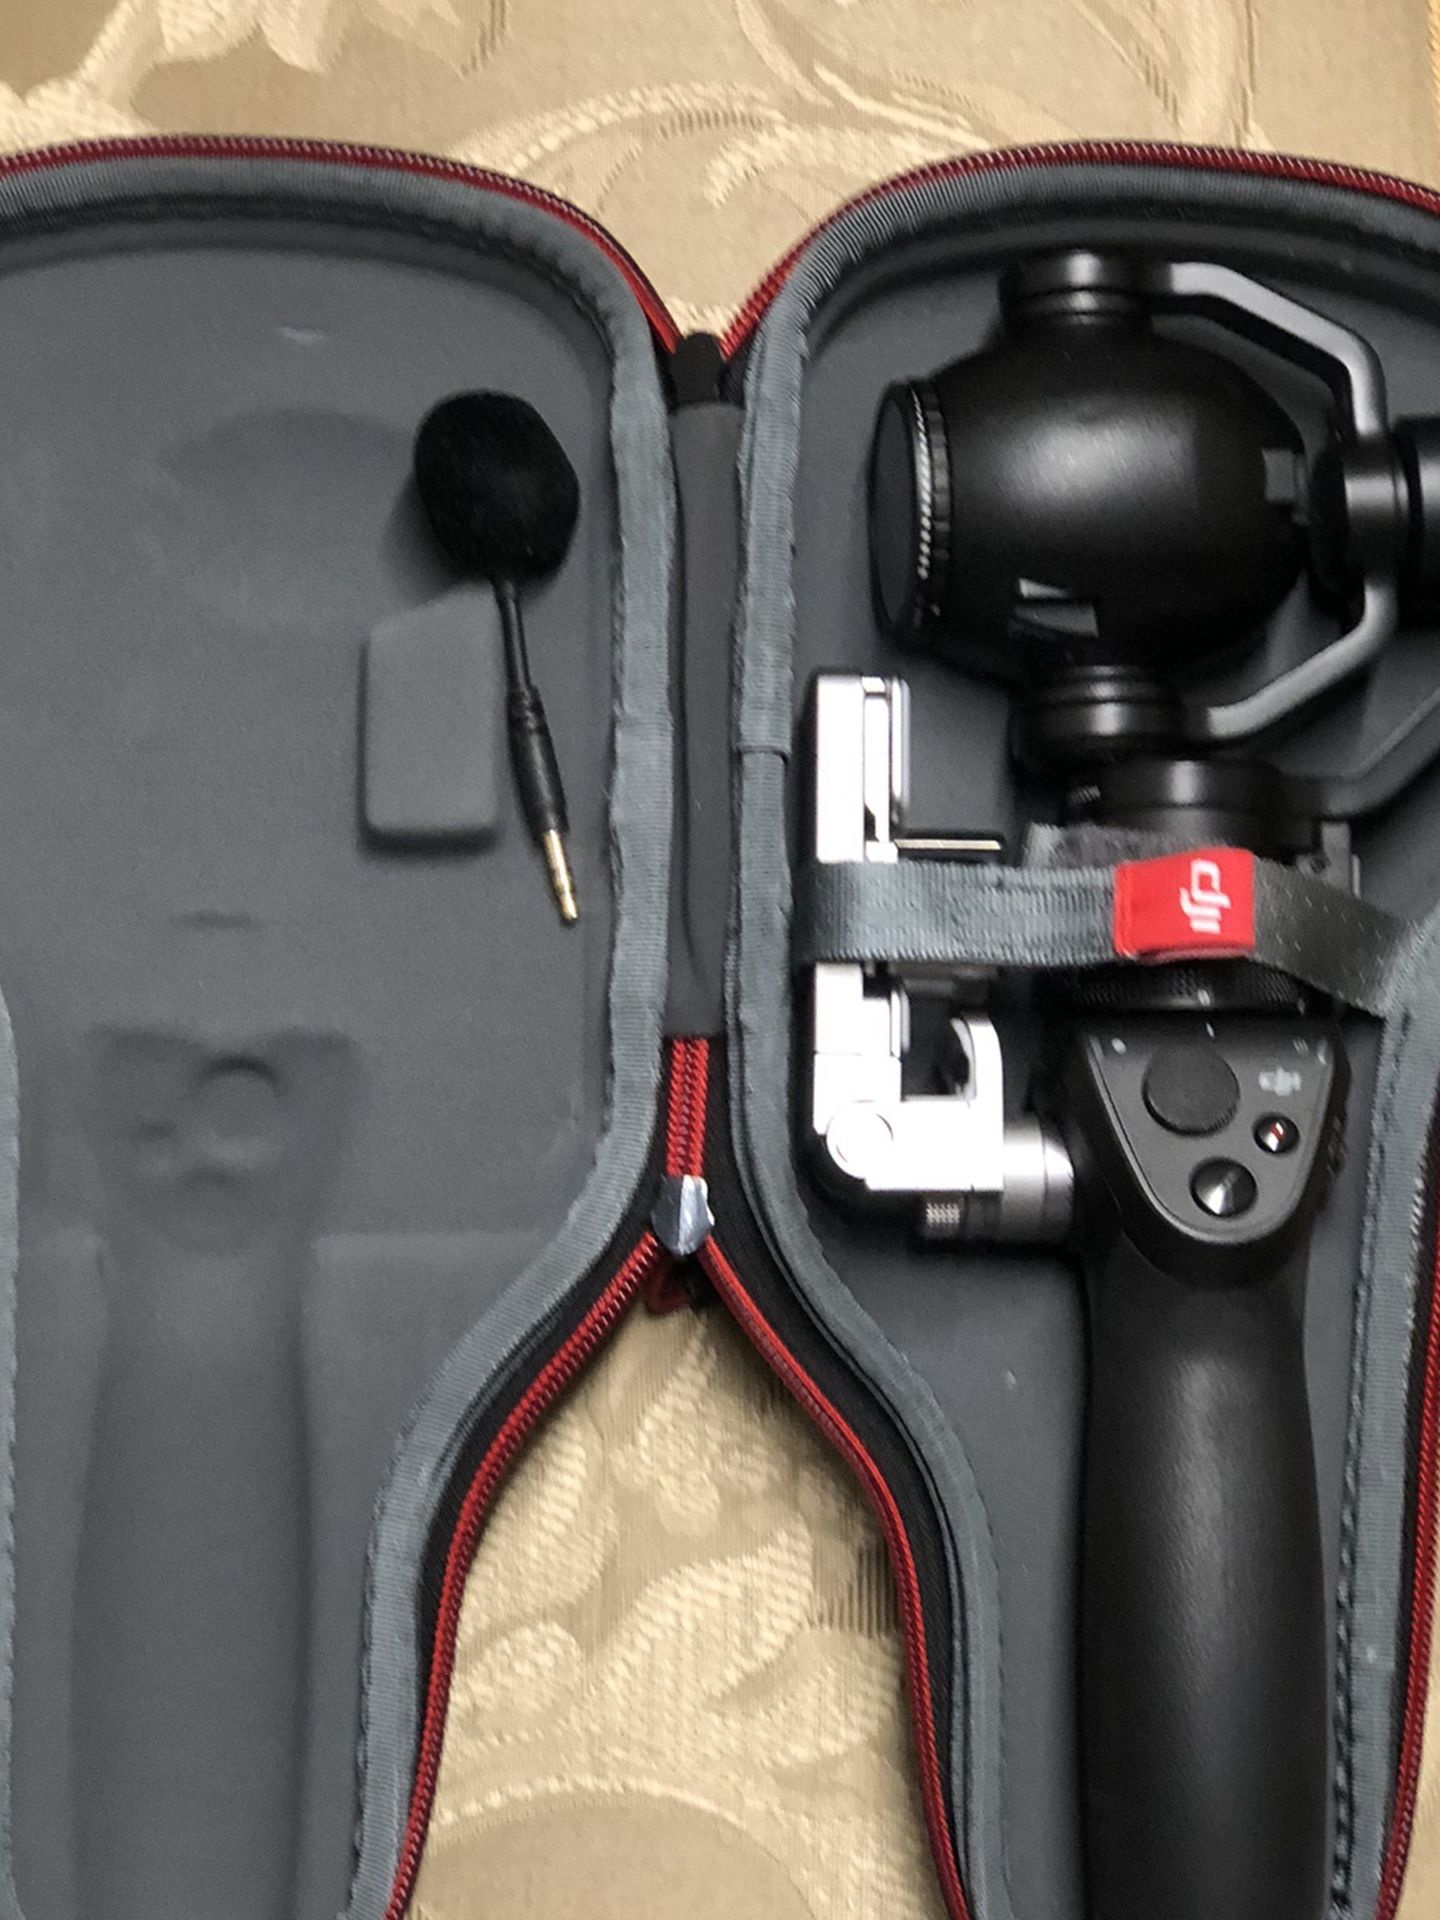 Great Condition DJI Osmo Camera With Extra Battery